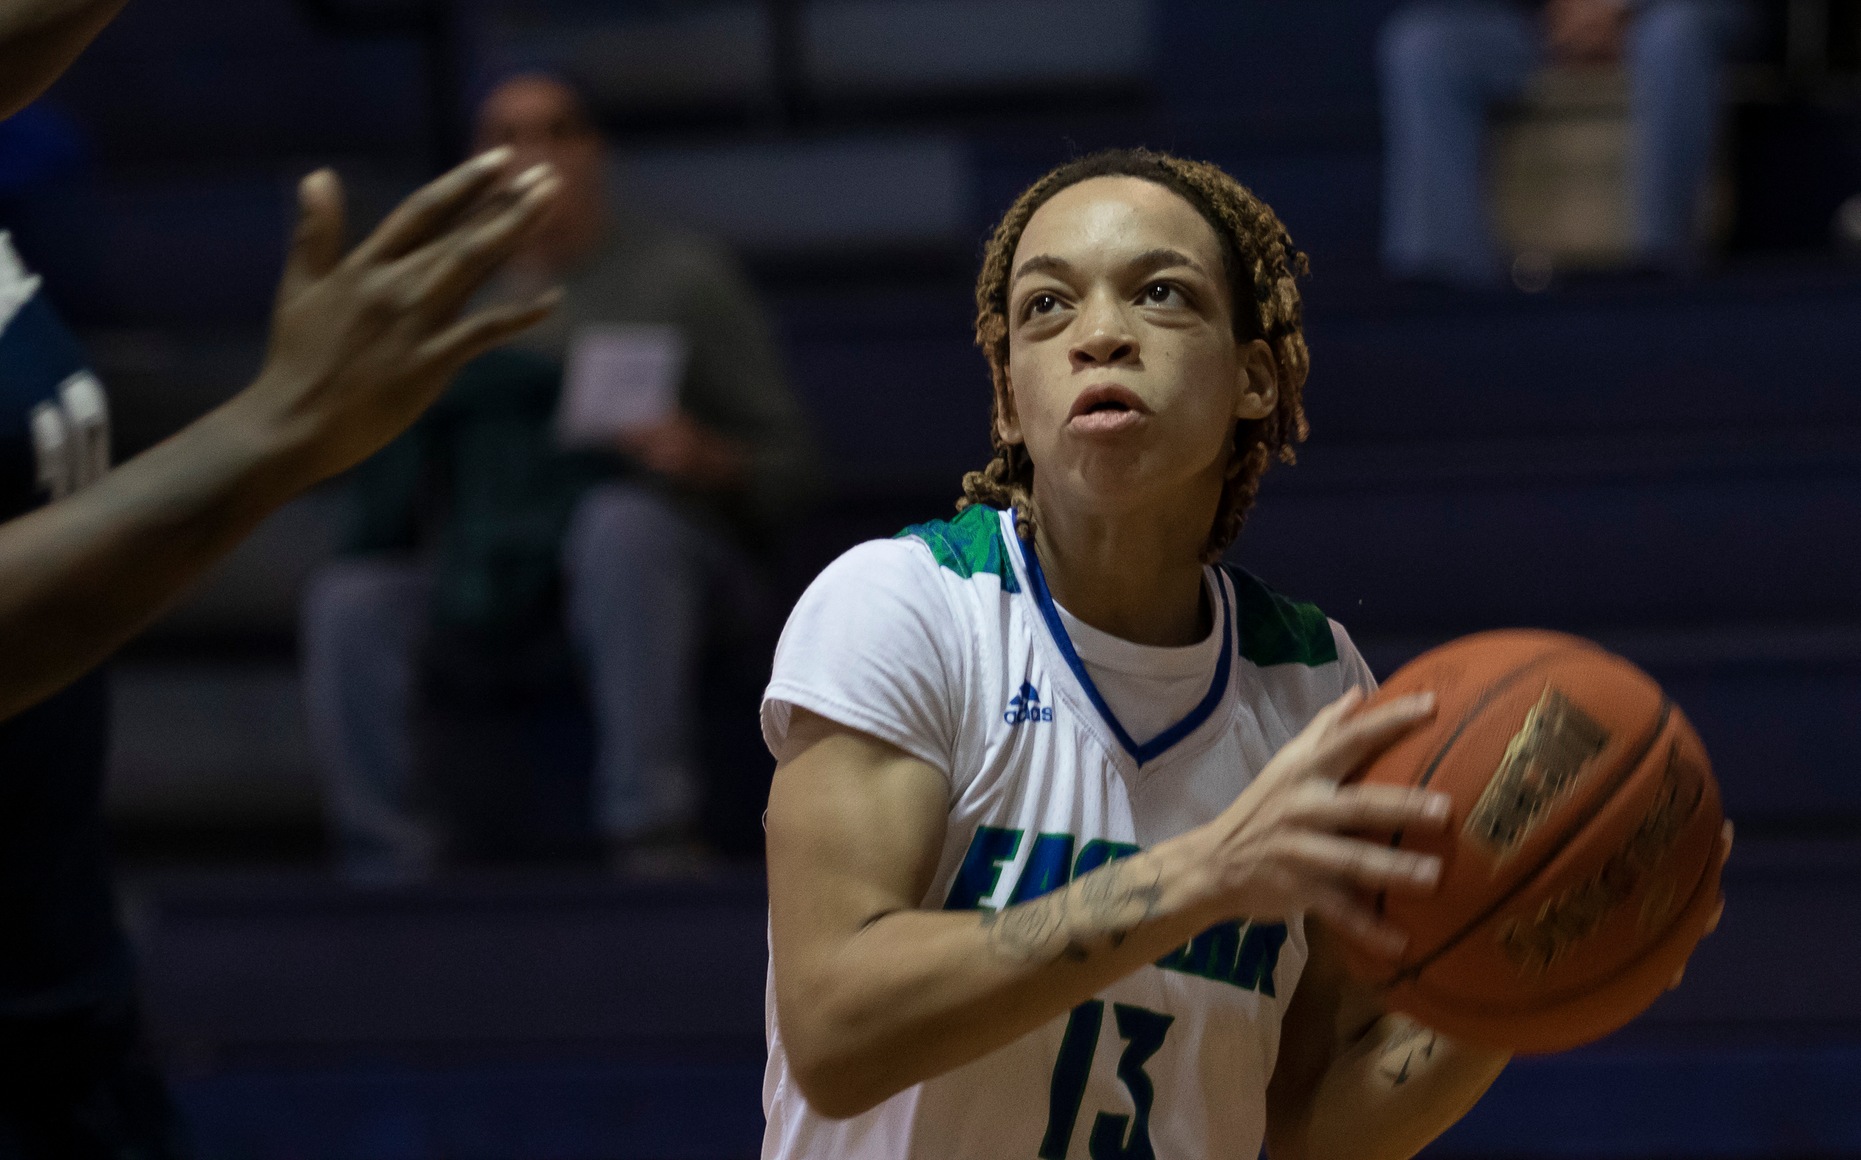 Women's basketball team tops St. Petersburg in Suncoast Conference matchup